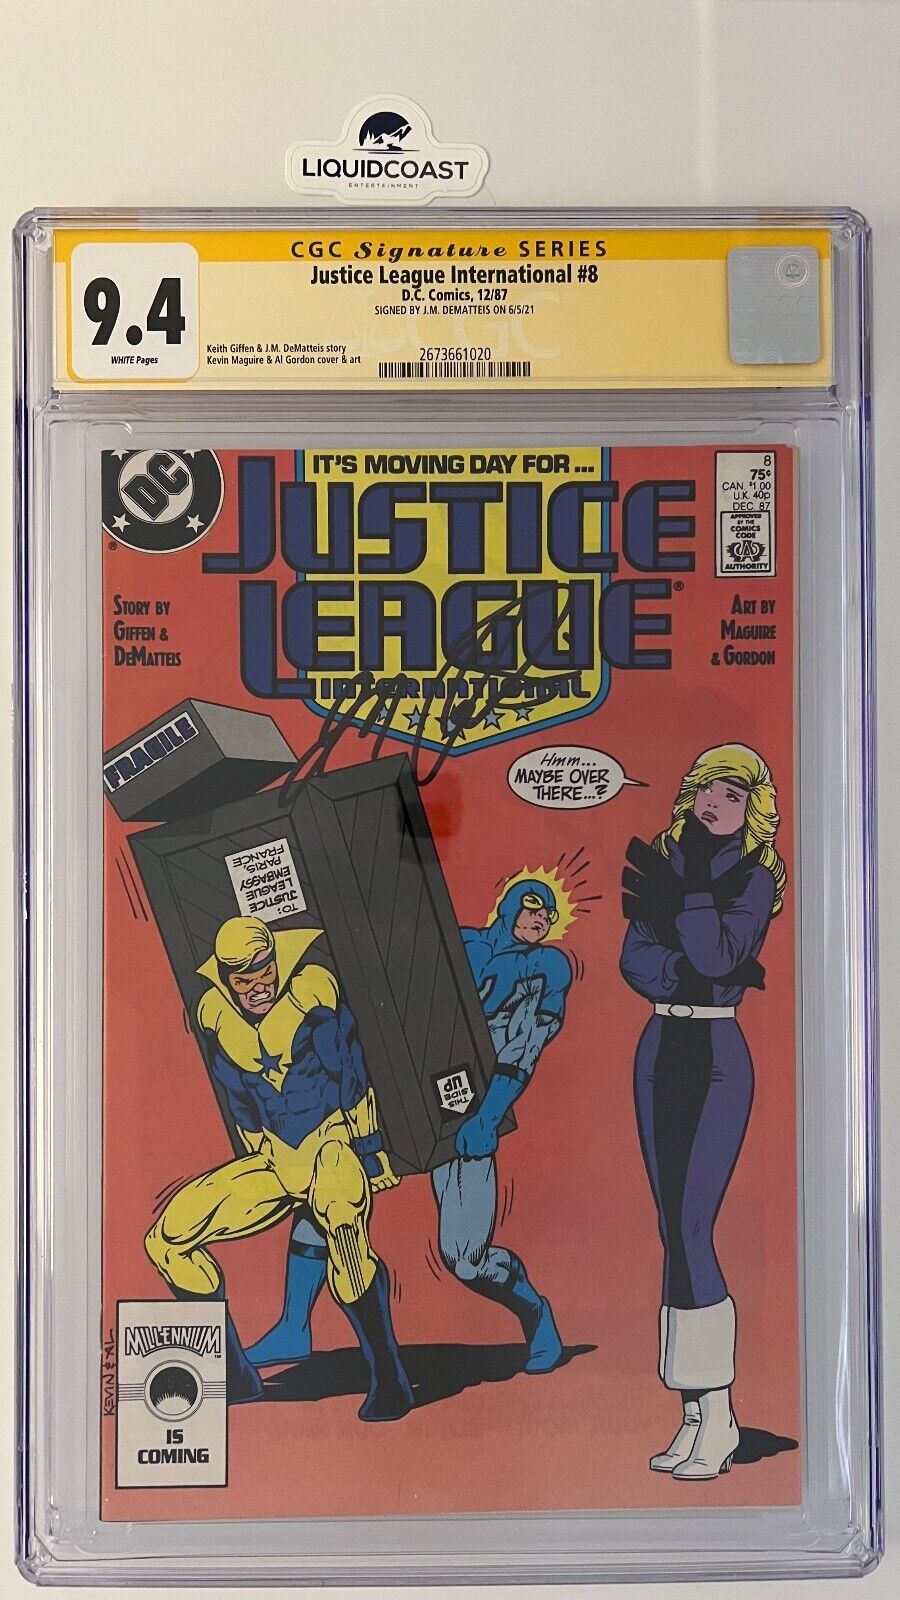 Justice League International #8 SS CGC 9.4 SIGNED BY J.M. DEMATTEIS